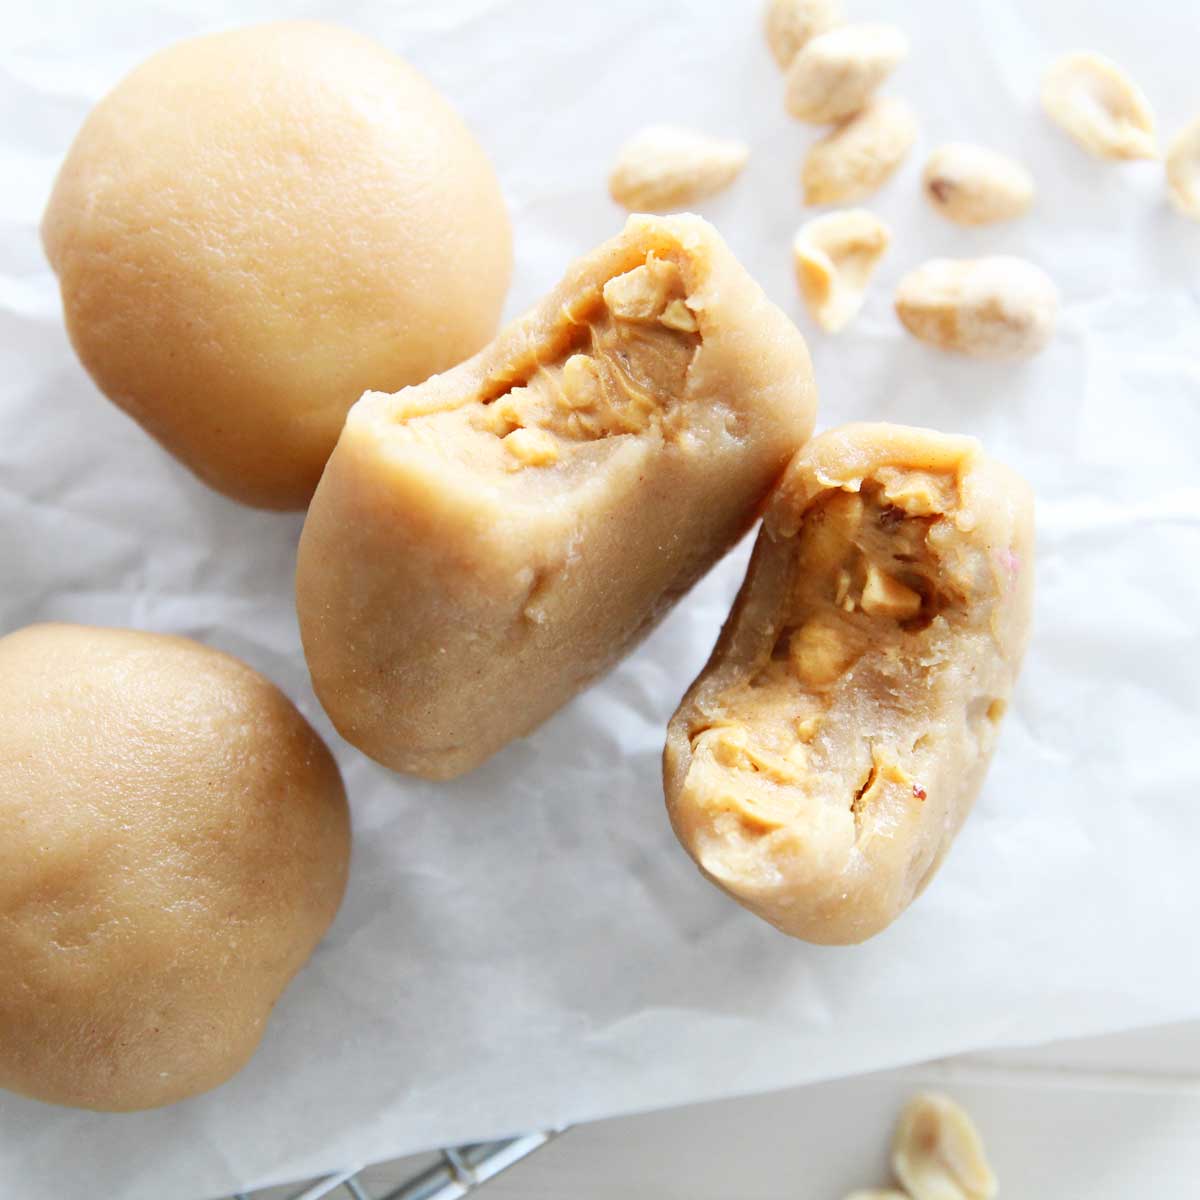 Chinese-Styled Peanut Butter Mochi Made in the Microwave - Peanut Butter Mochi